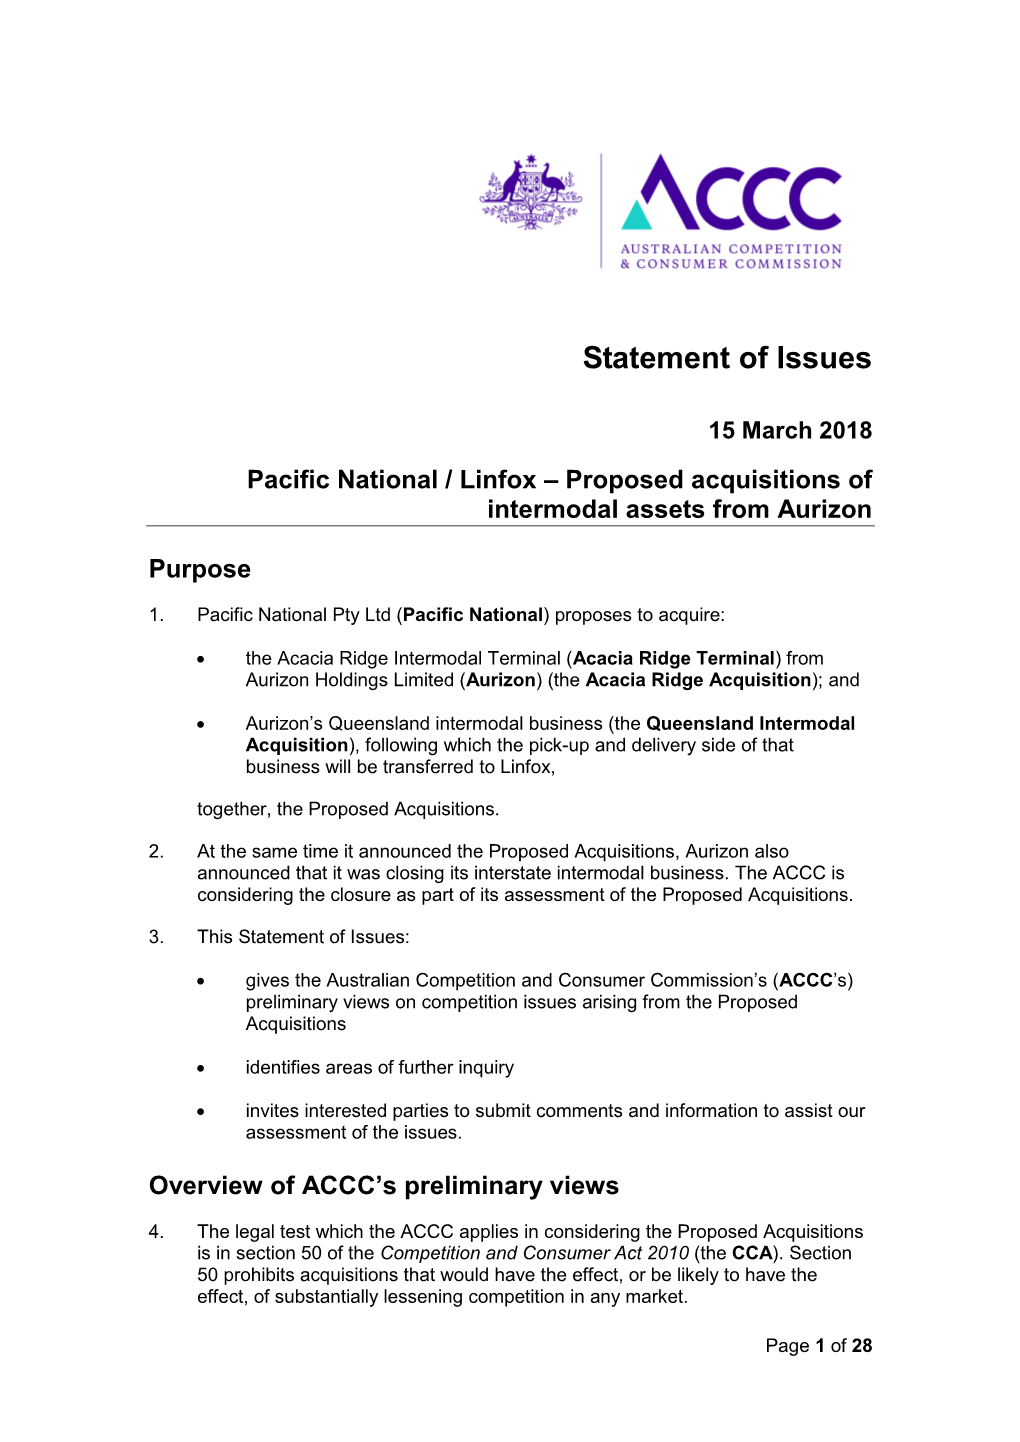 Pacific National / Linfox – Proposed Acquisitions of Intermodal Assets from Aurizon Purpose